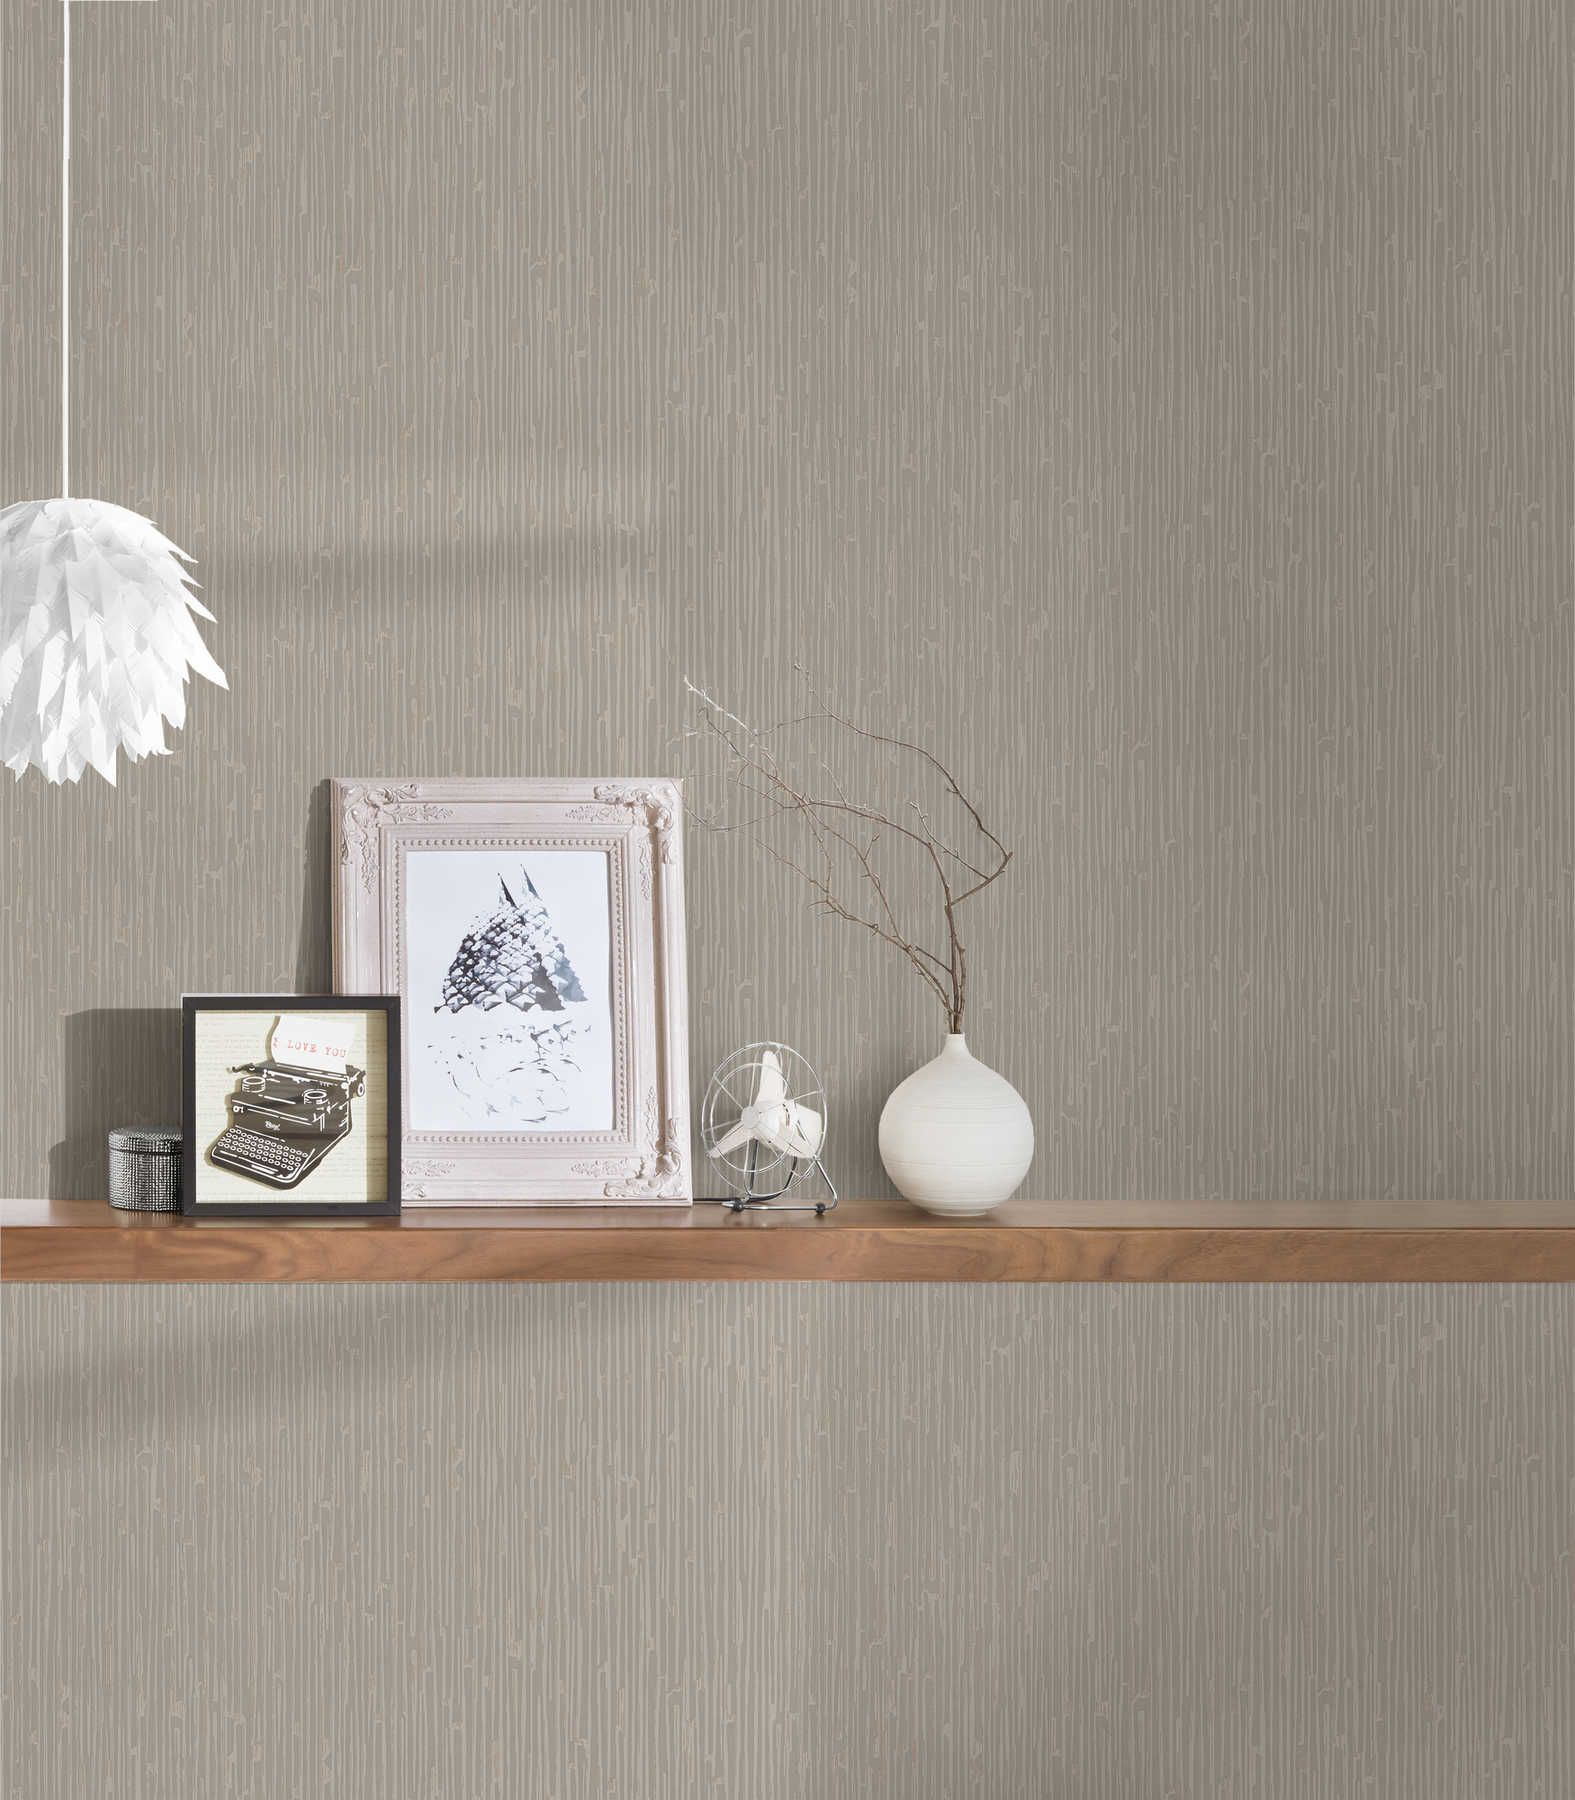             Non-woven wallpaper taupe with tone-on-tone texture effect
        